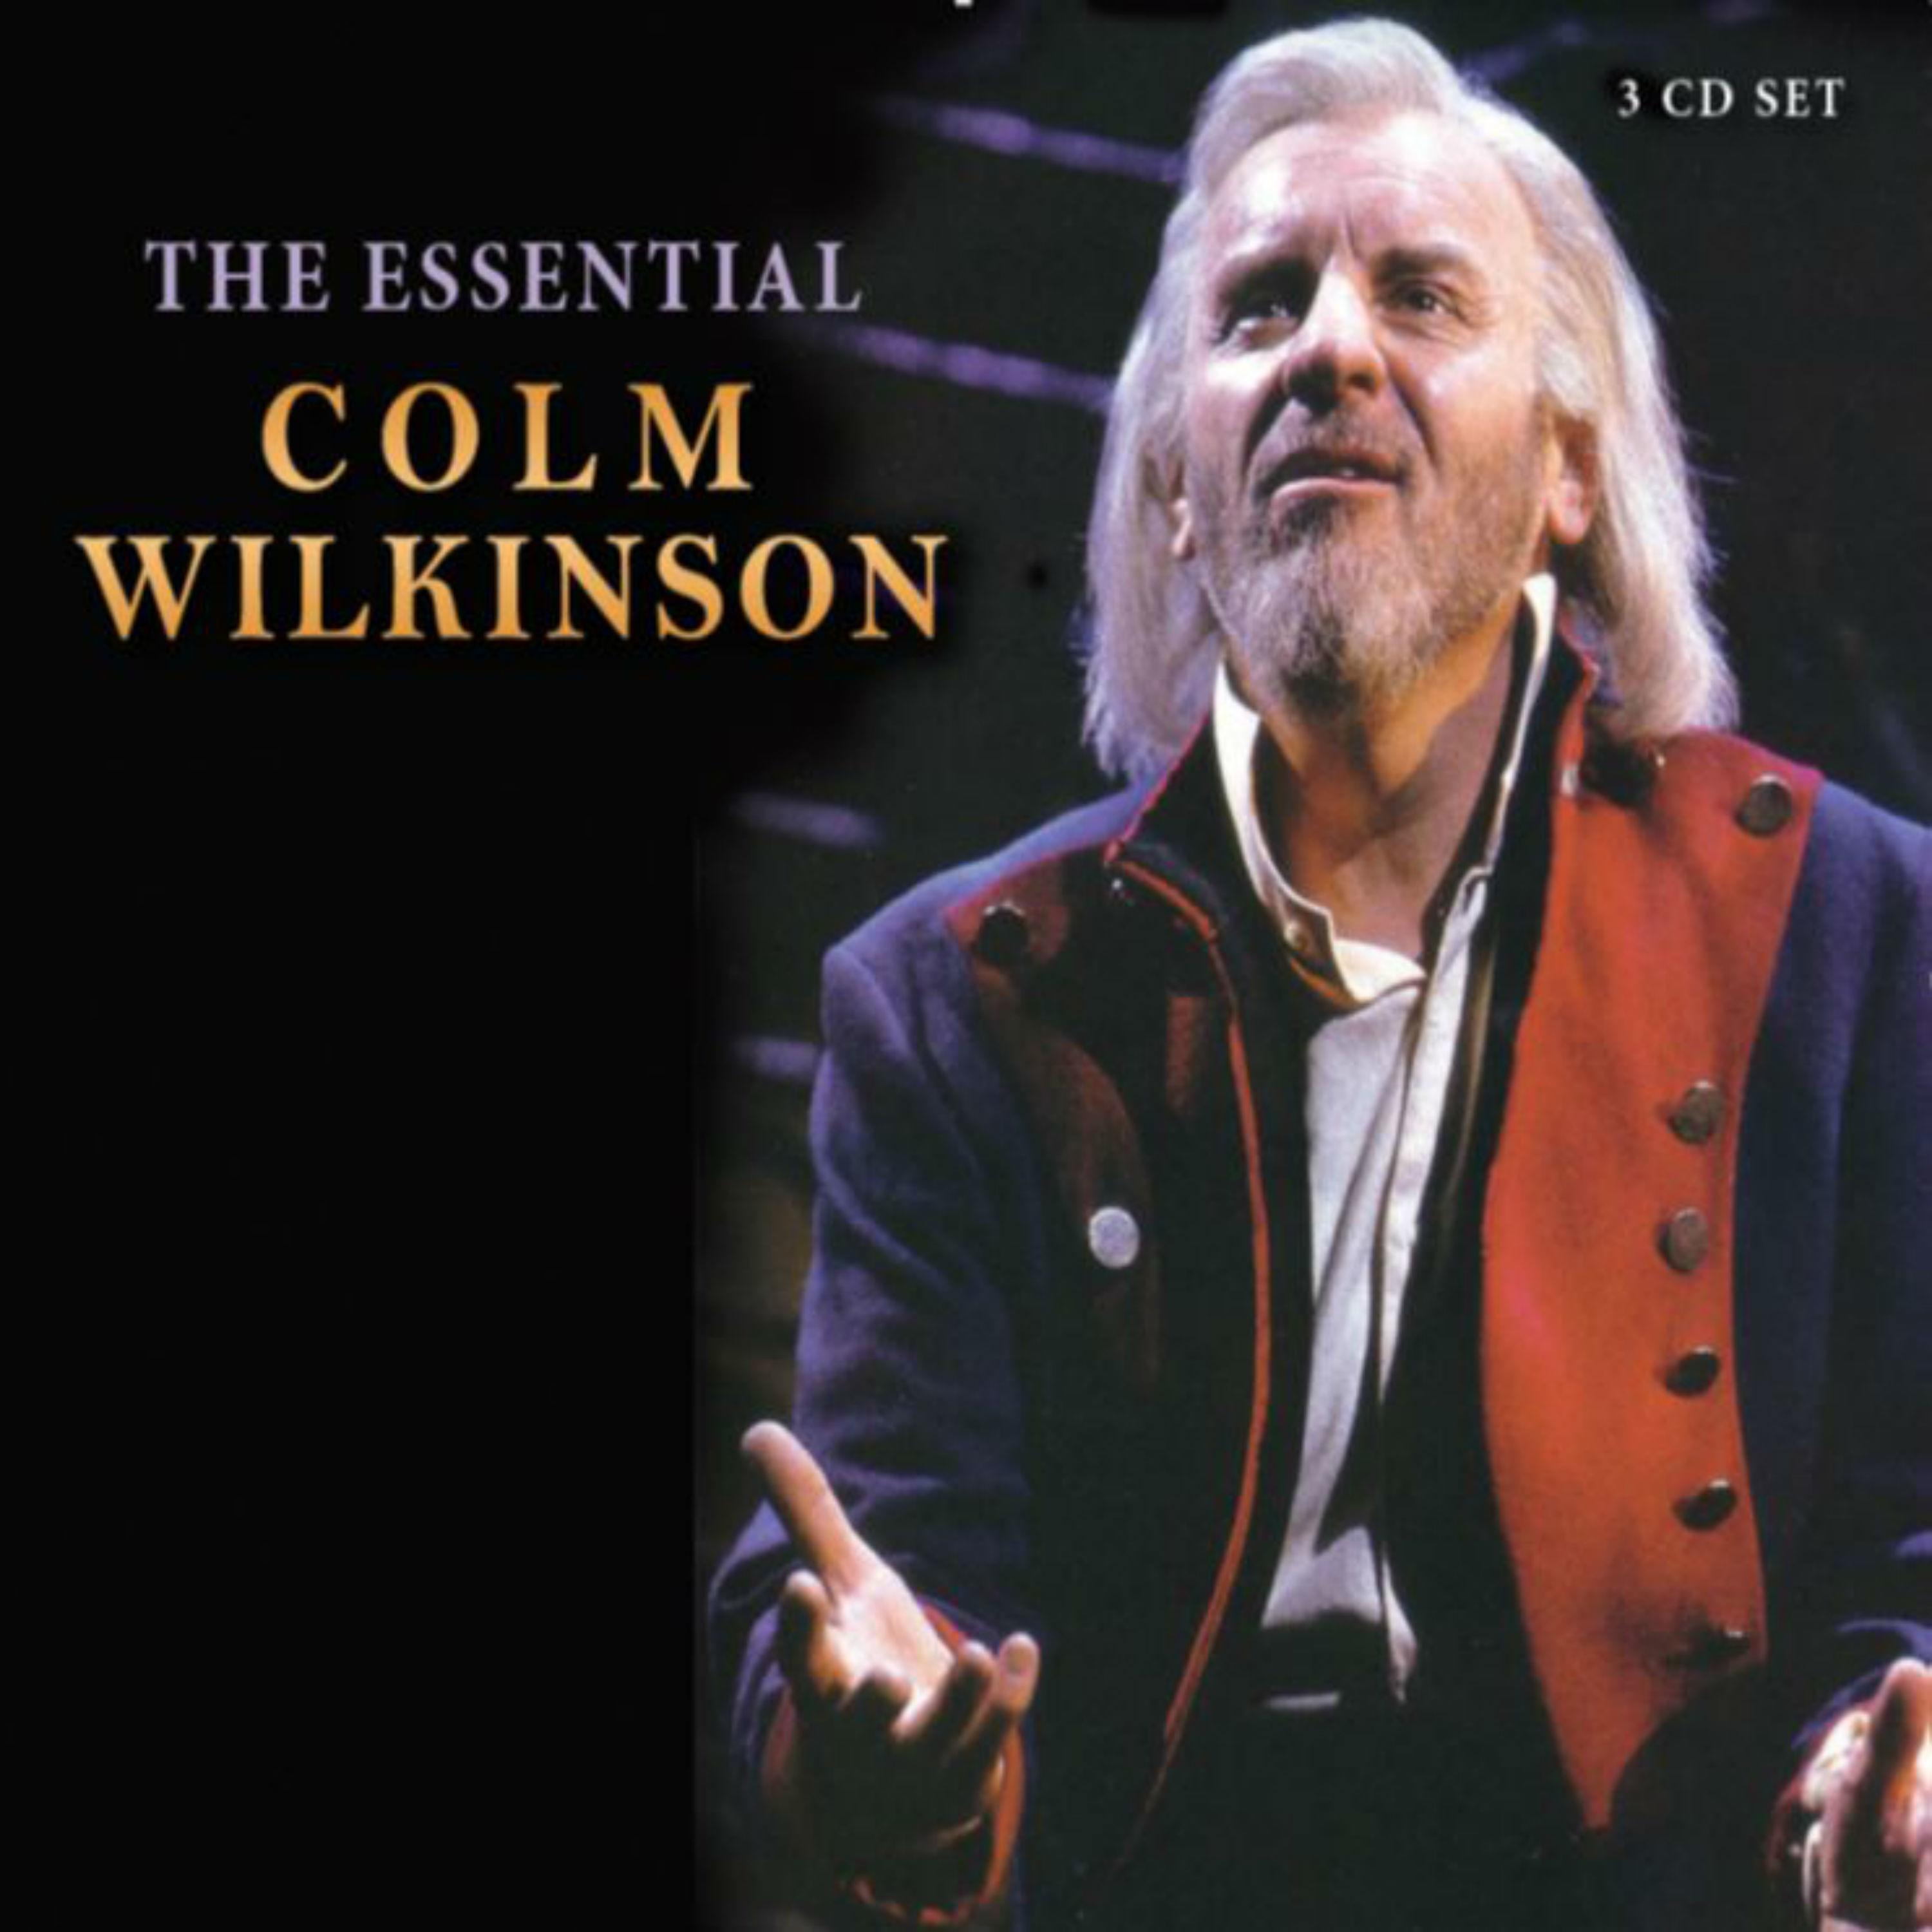 Colm Wilkinson - You Don't Know Me